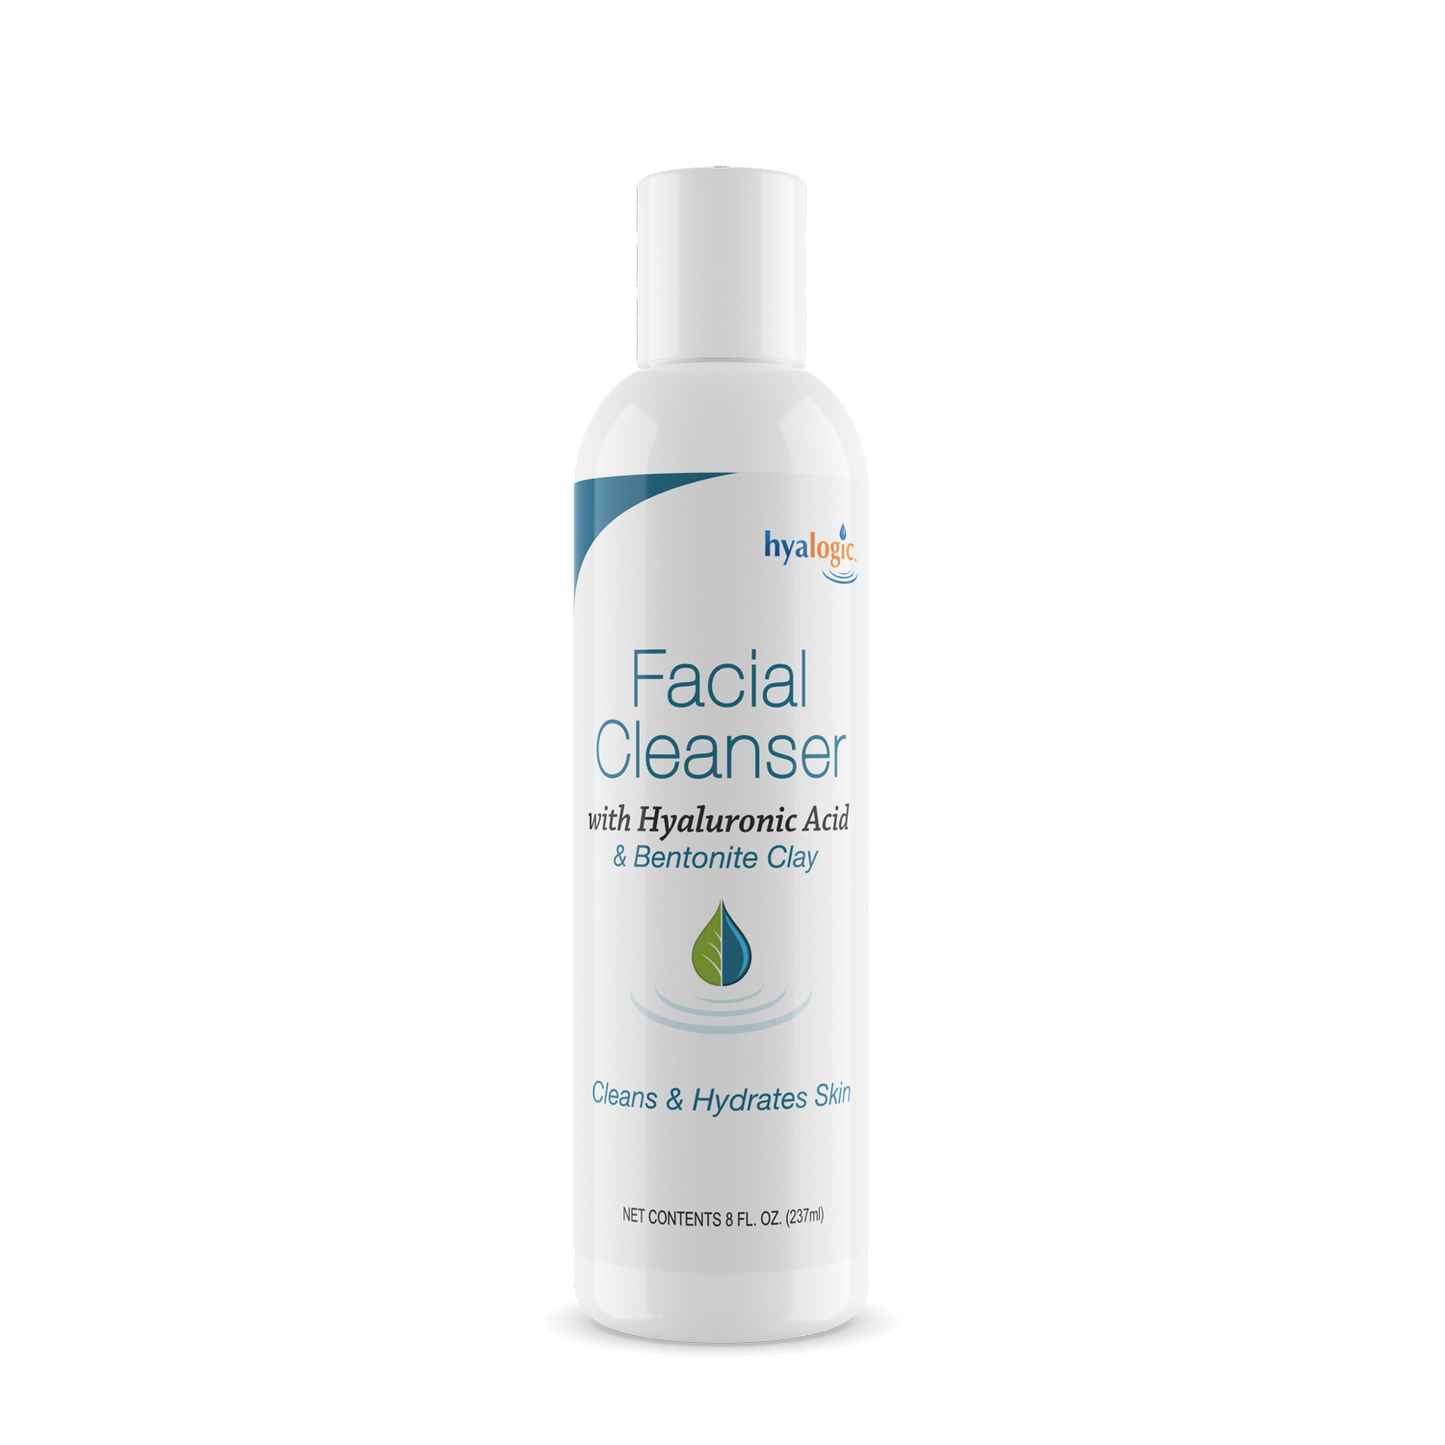 HYALOGIC FACIAL CLEANSER